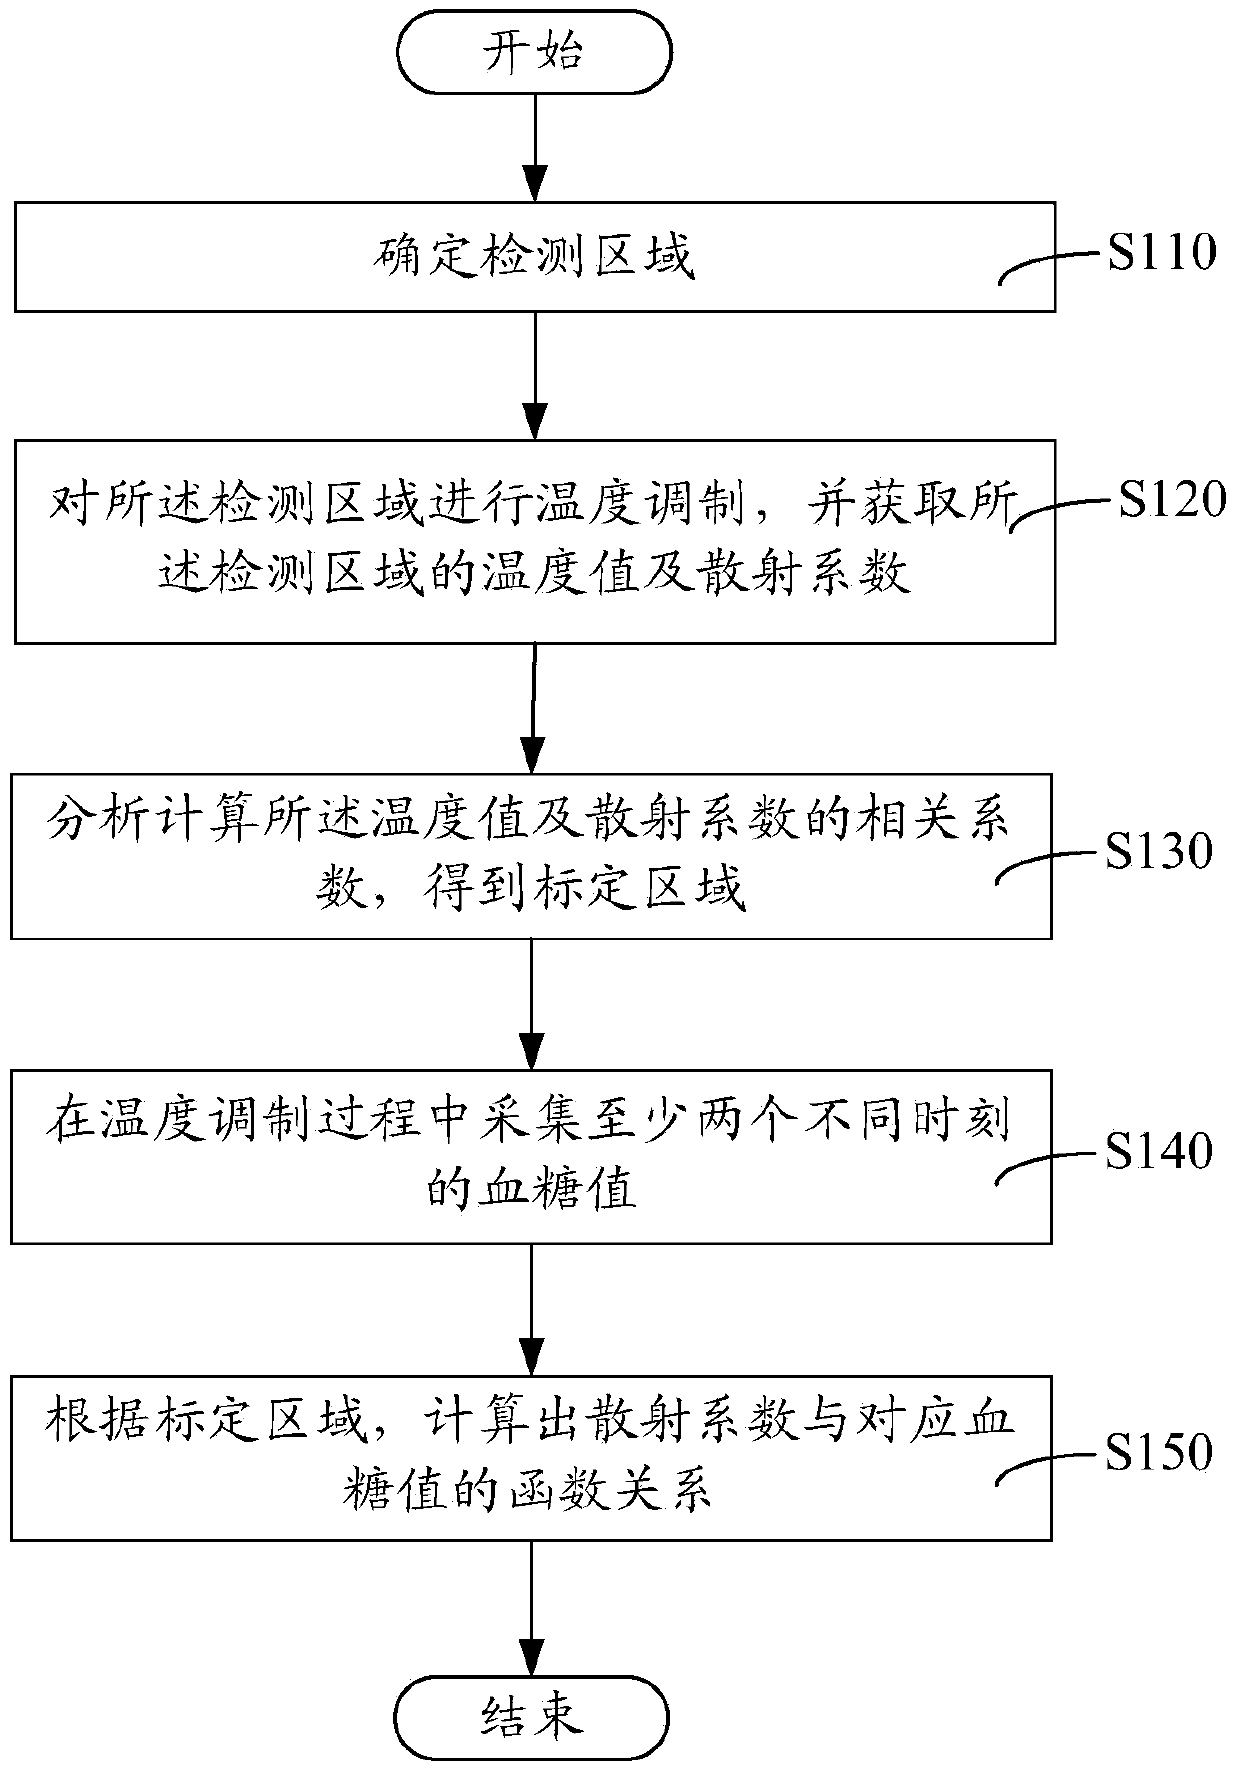 Blood glucose testing and calibrating method and system